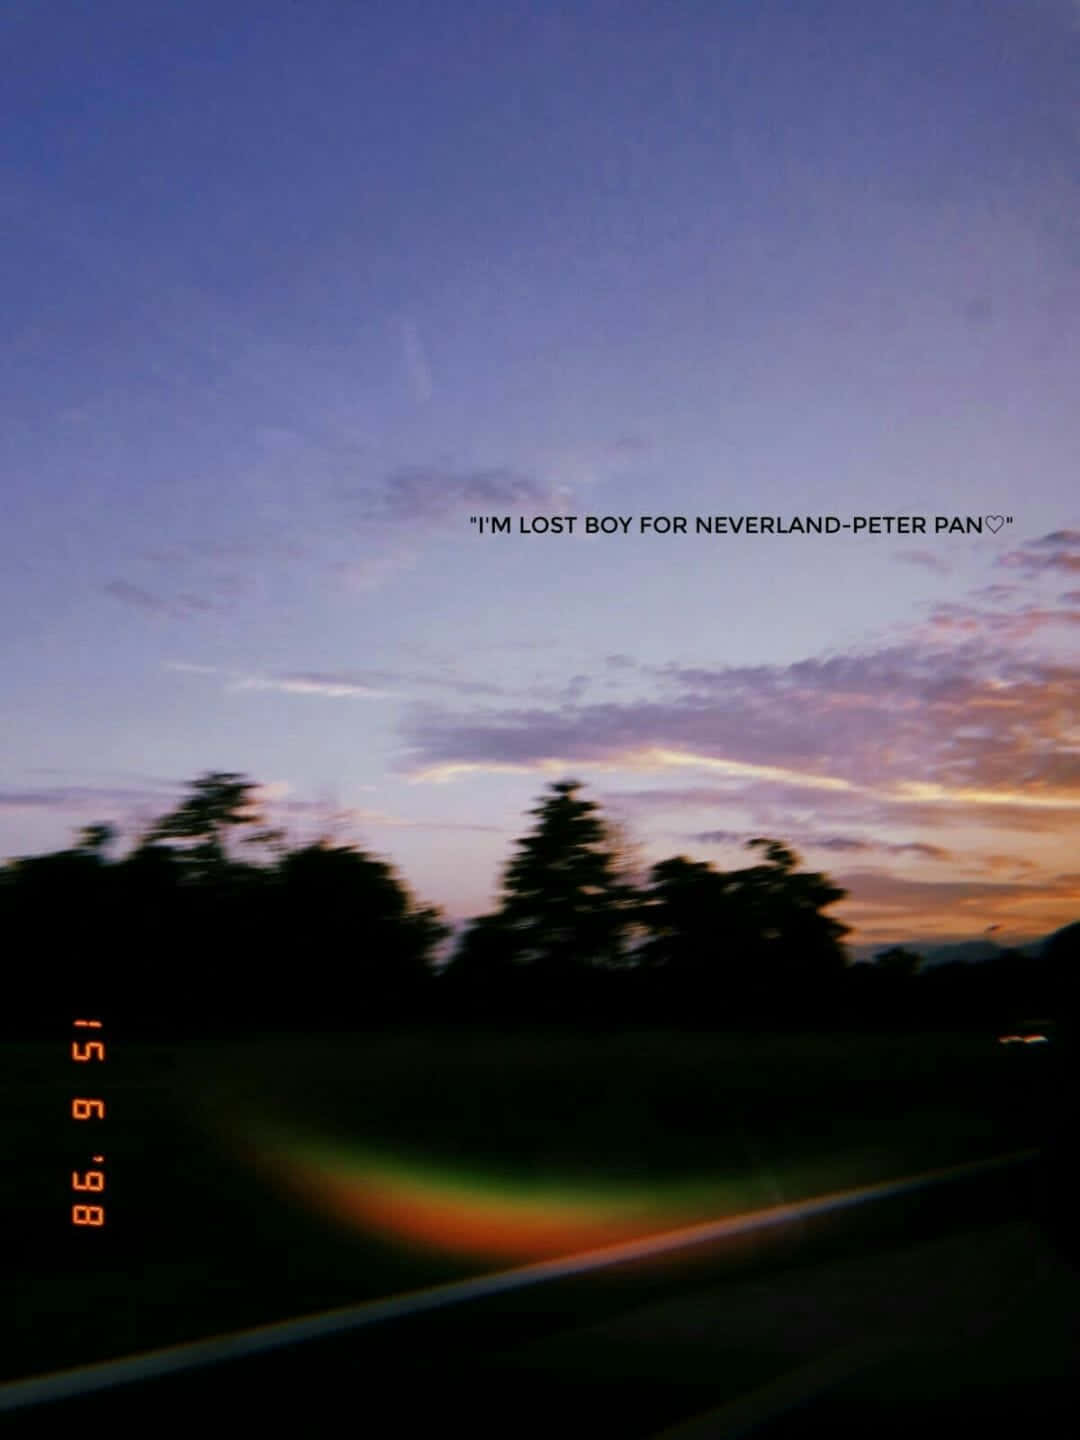 Quotes Tumblr Blurry Sunset Photo Wallpaper